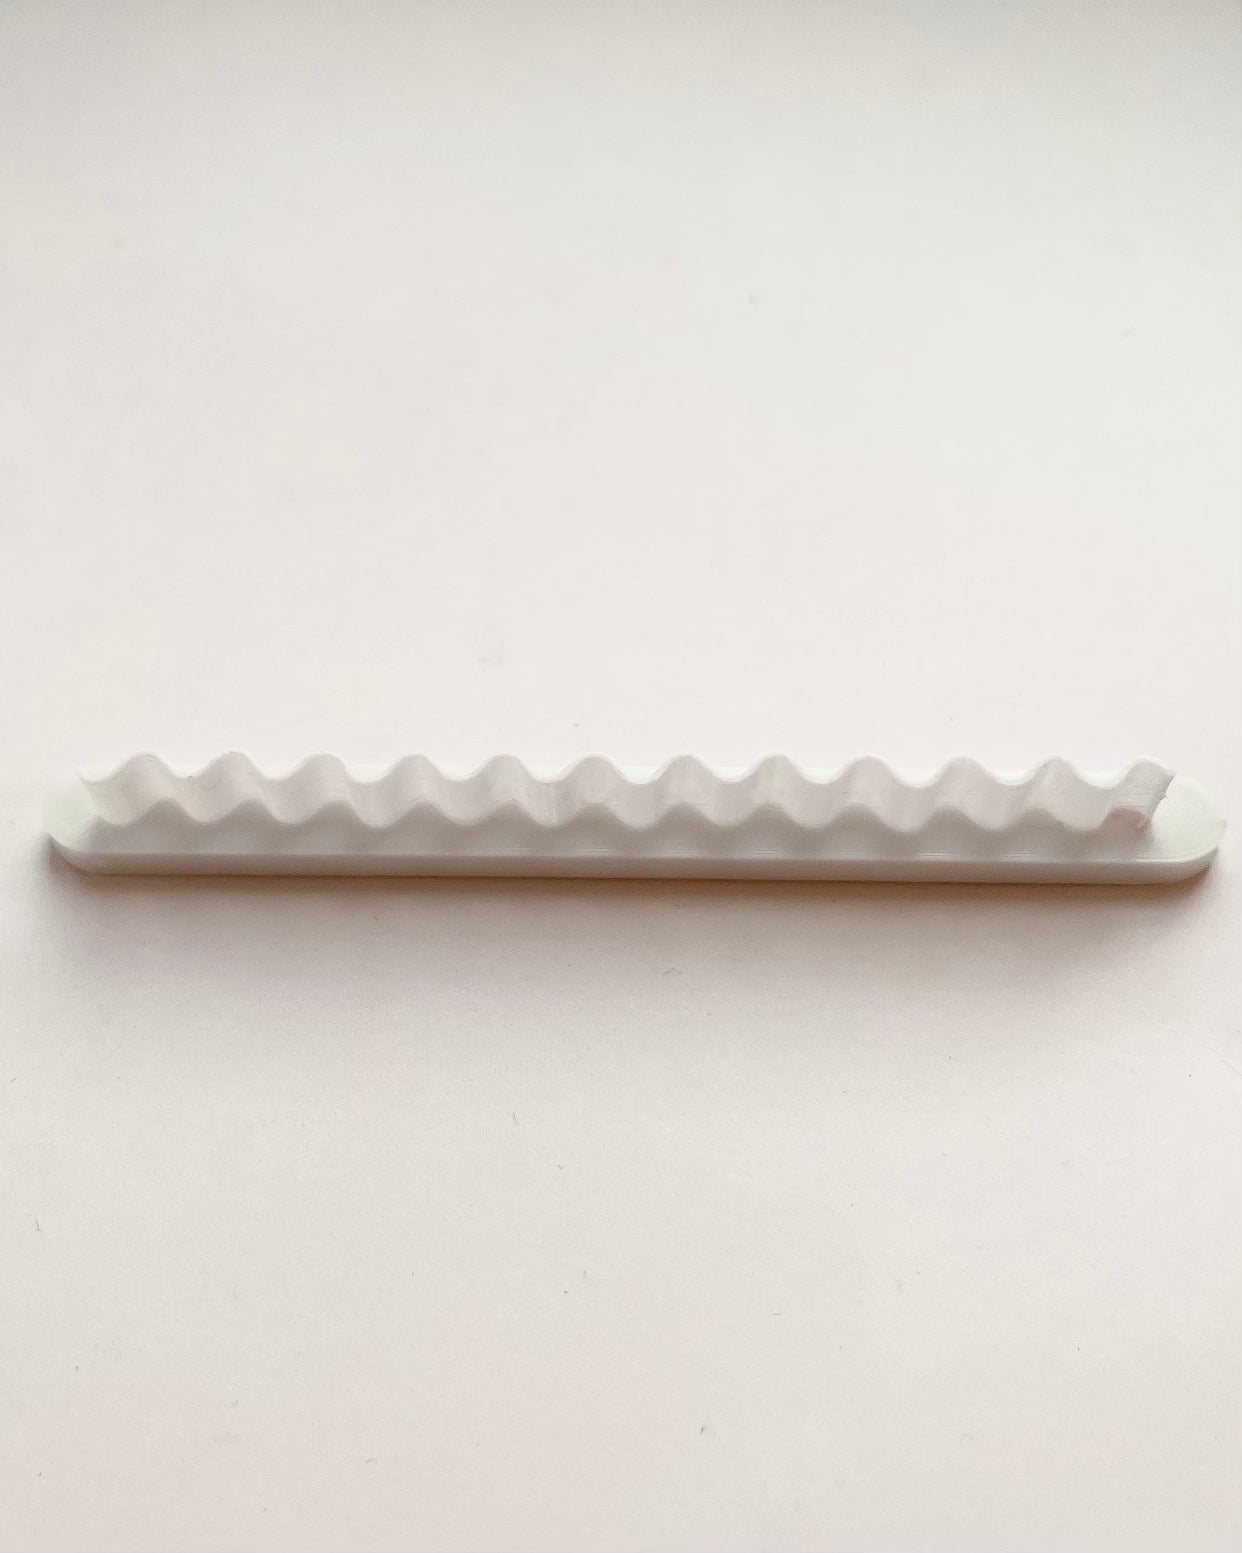 Wavy Patterned Blade